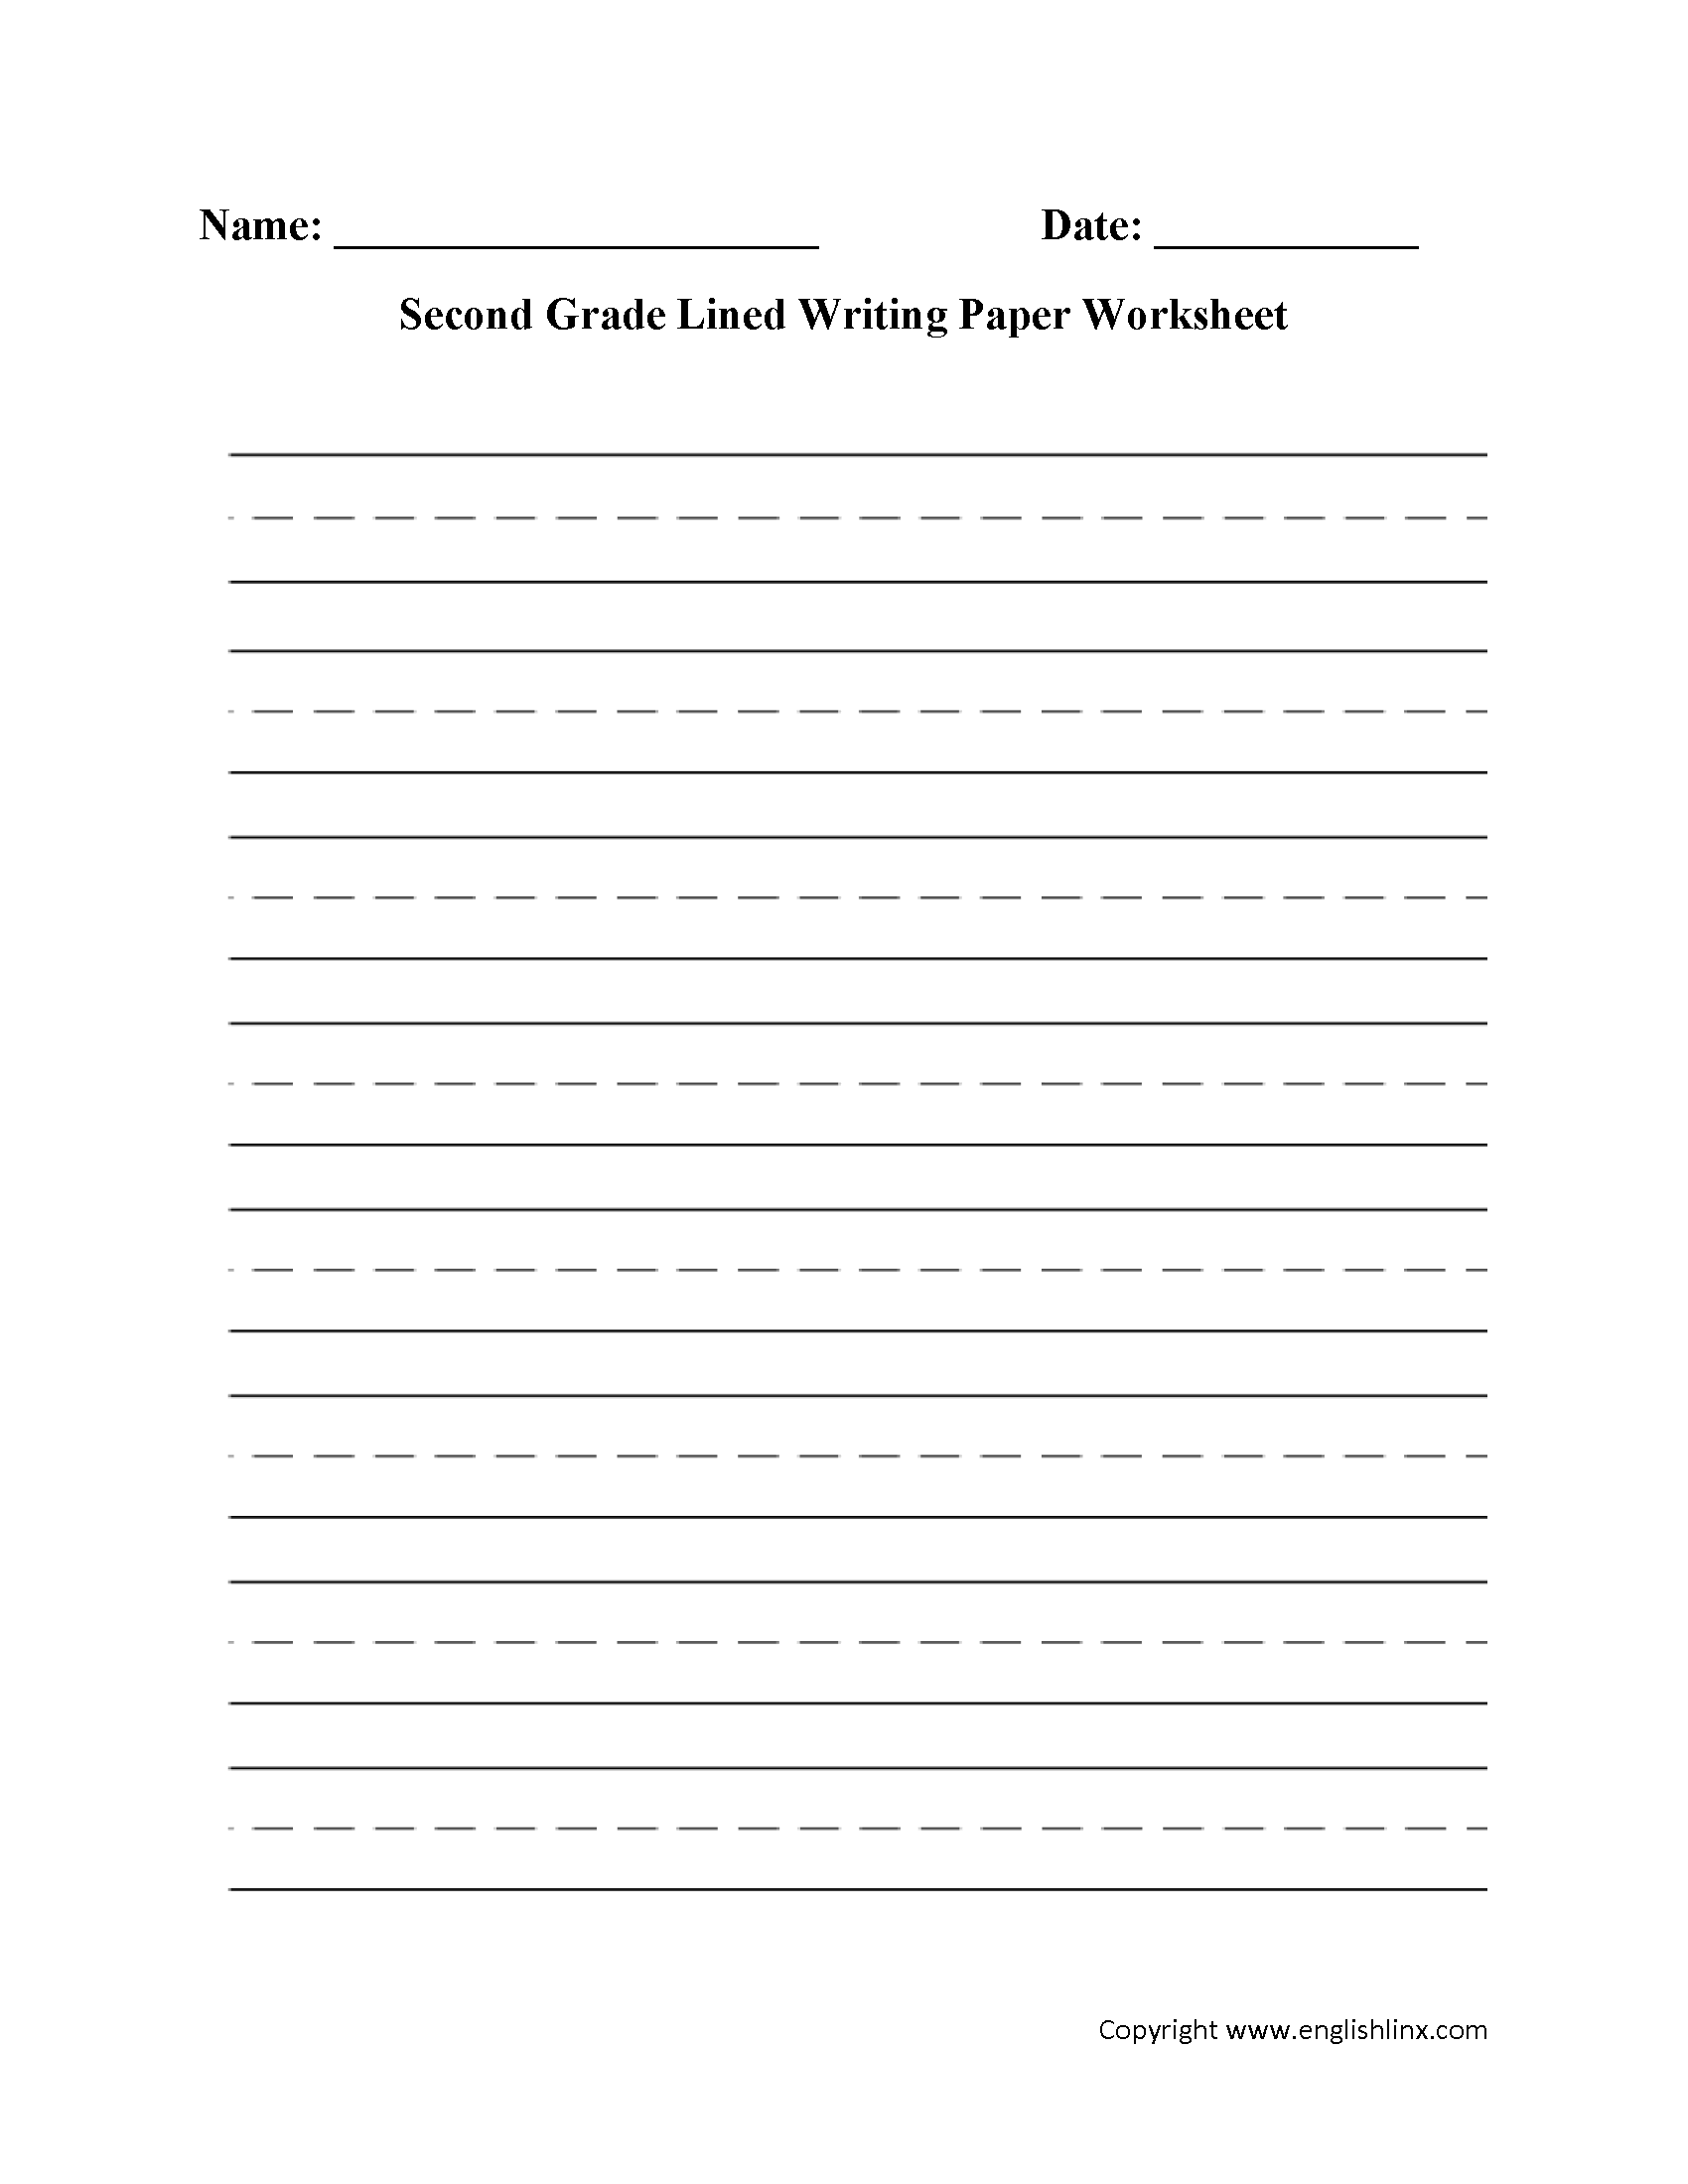 printable lined paper second grade